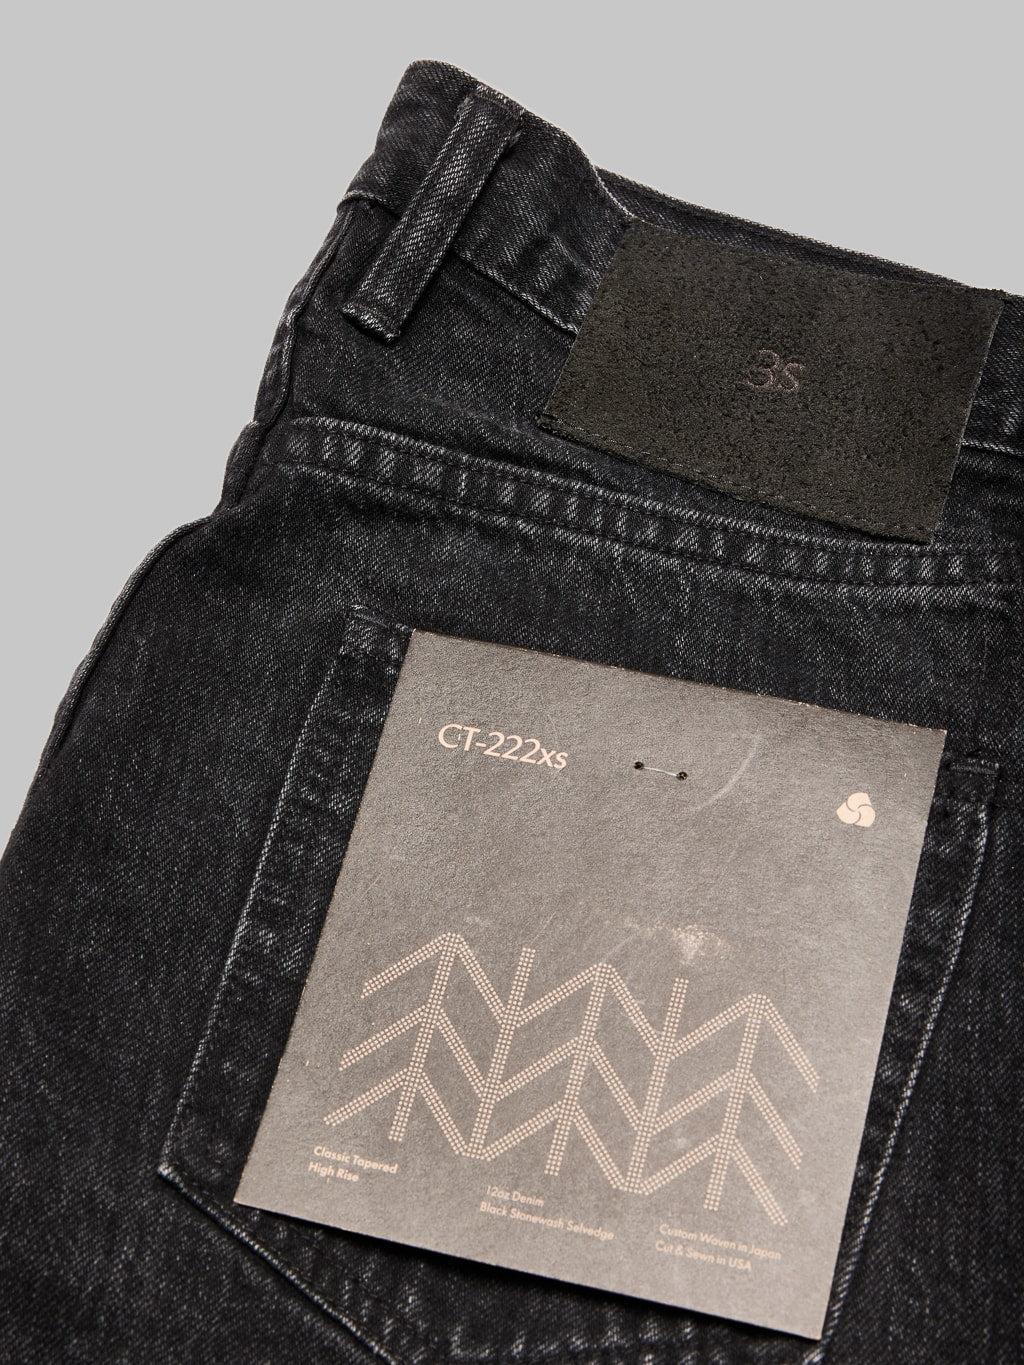 3sixteen CT 220x Classic Tapered Stonewashed Double Black label